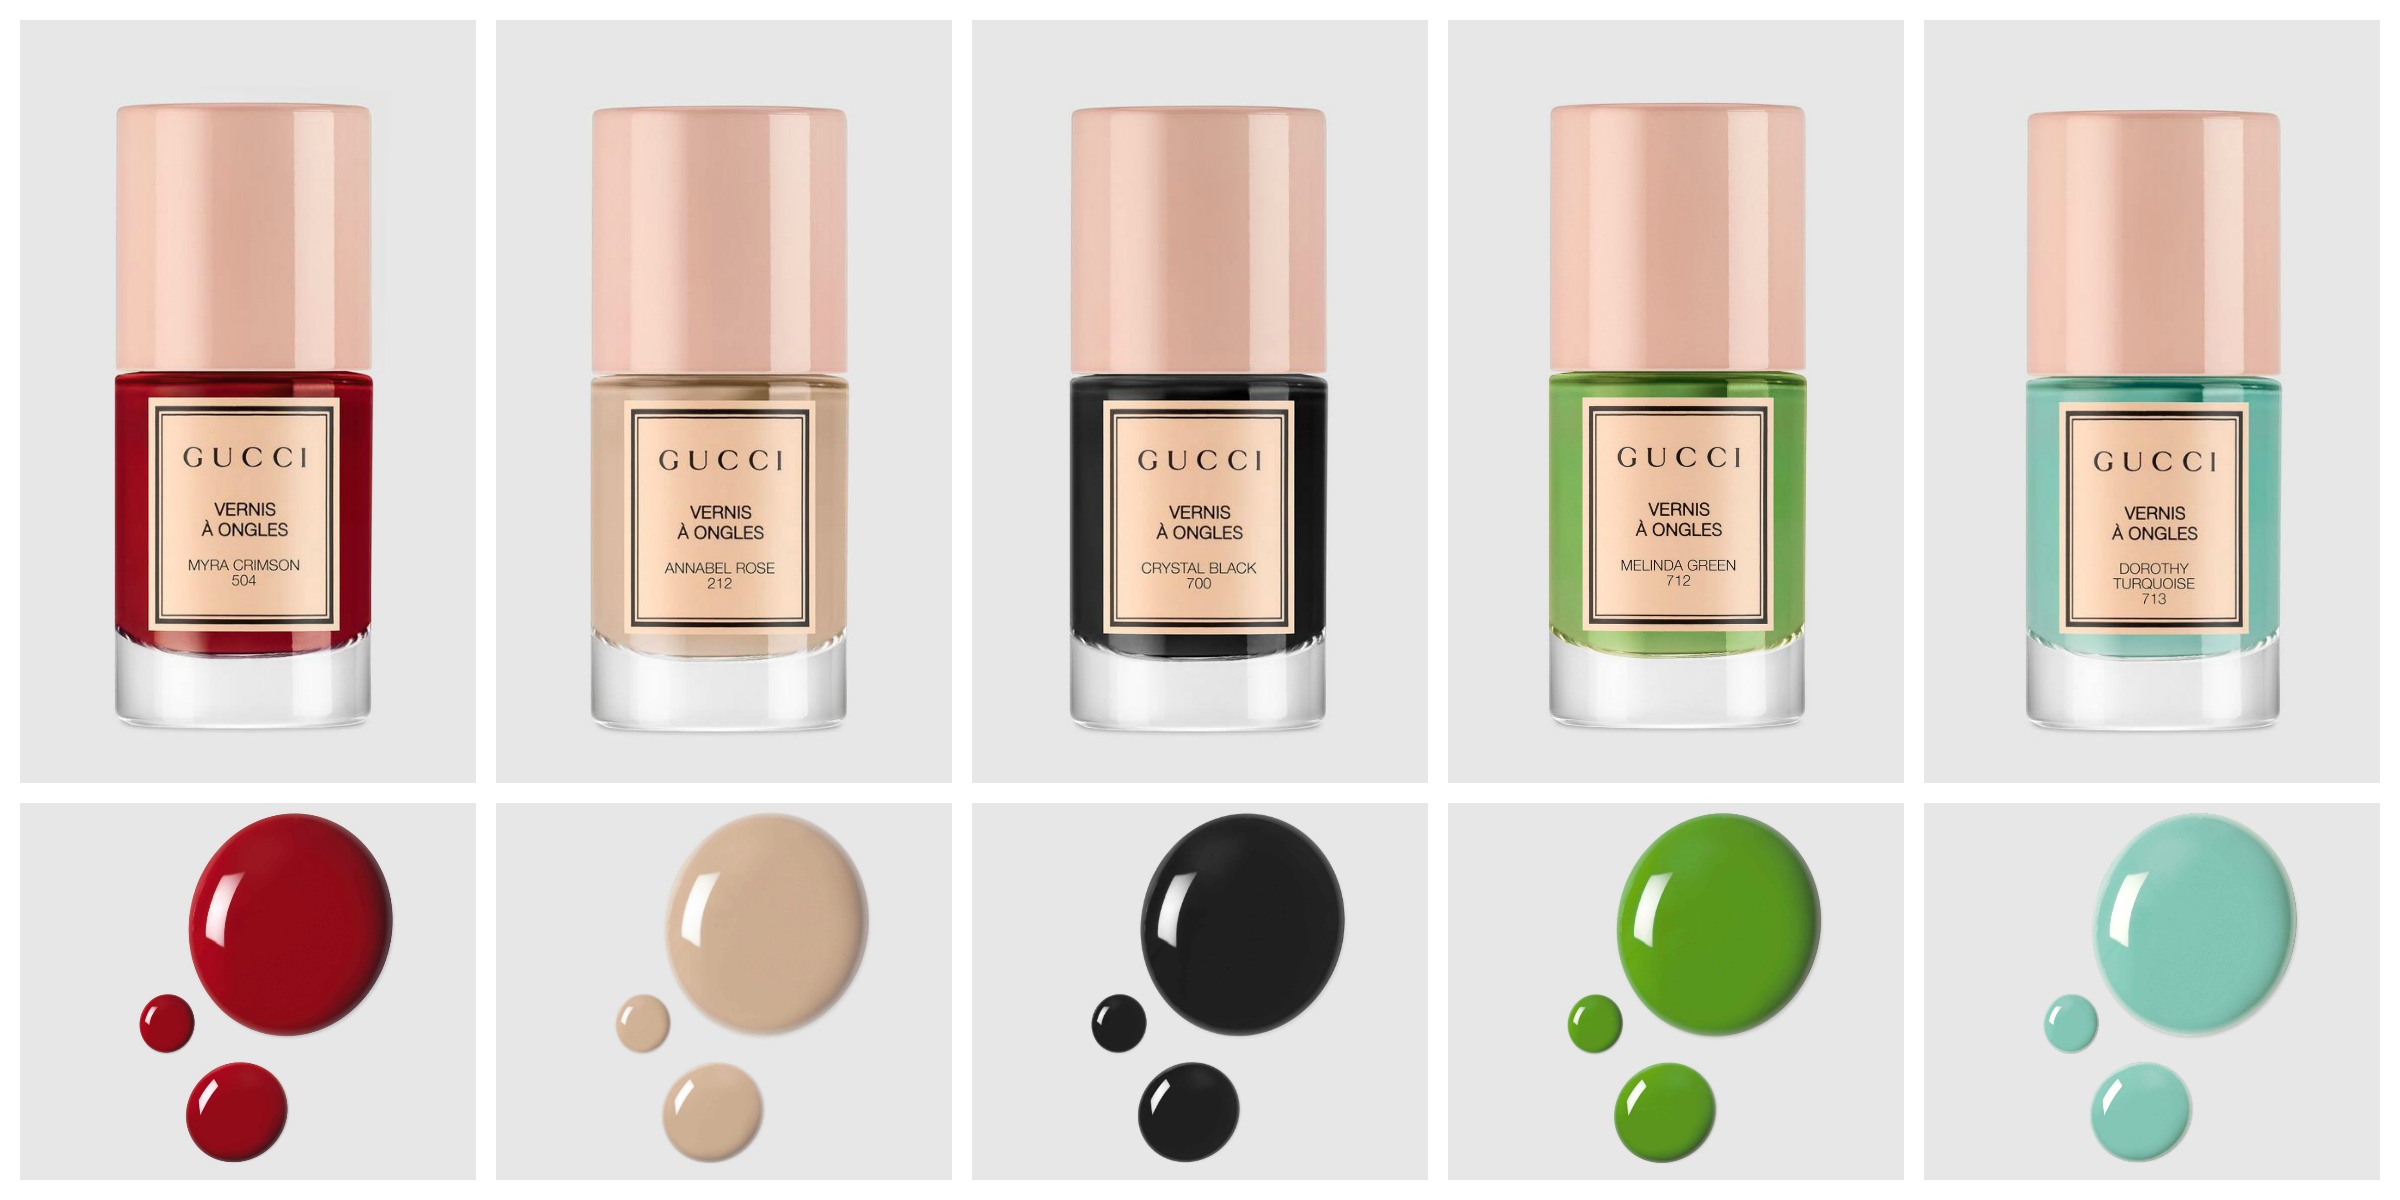 Gucci Beauty Nagellak capsule collection 